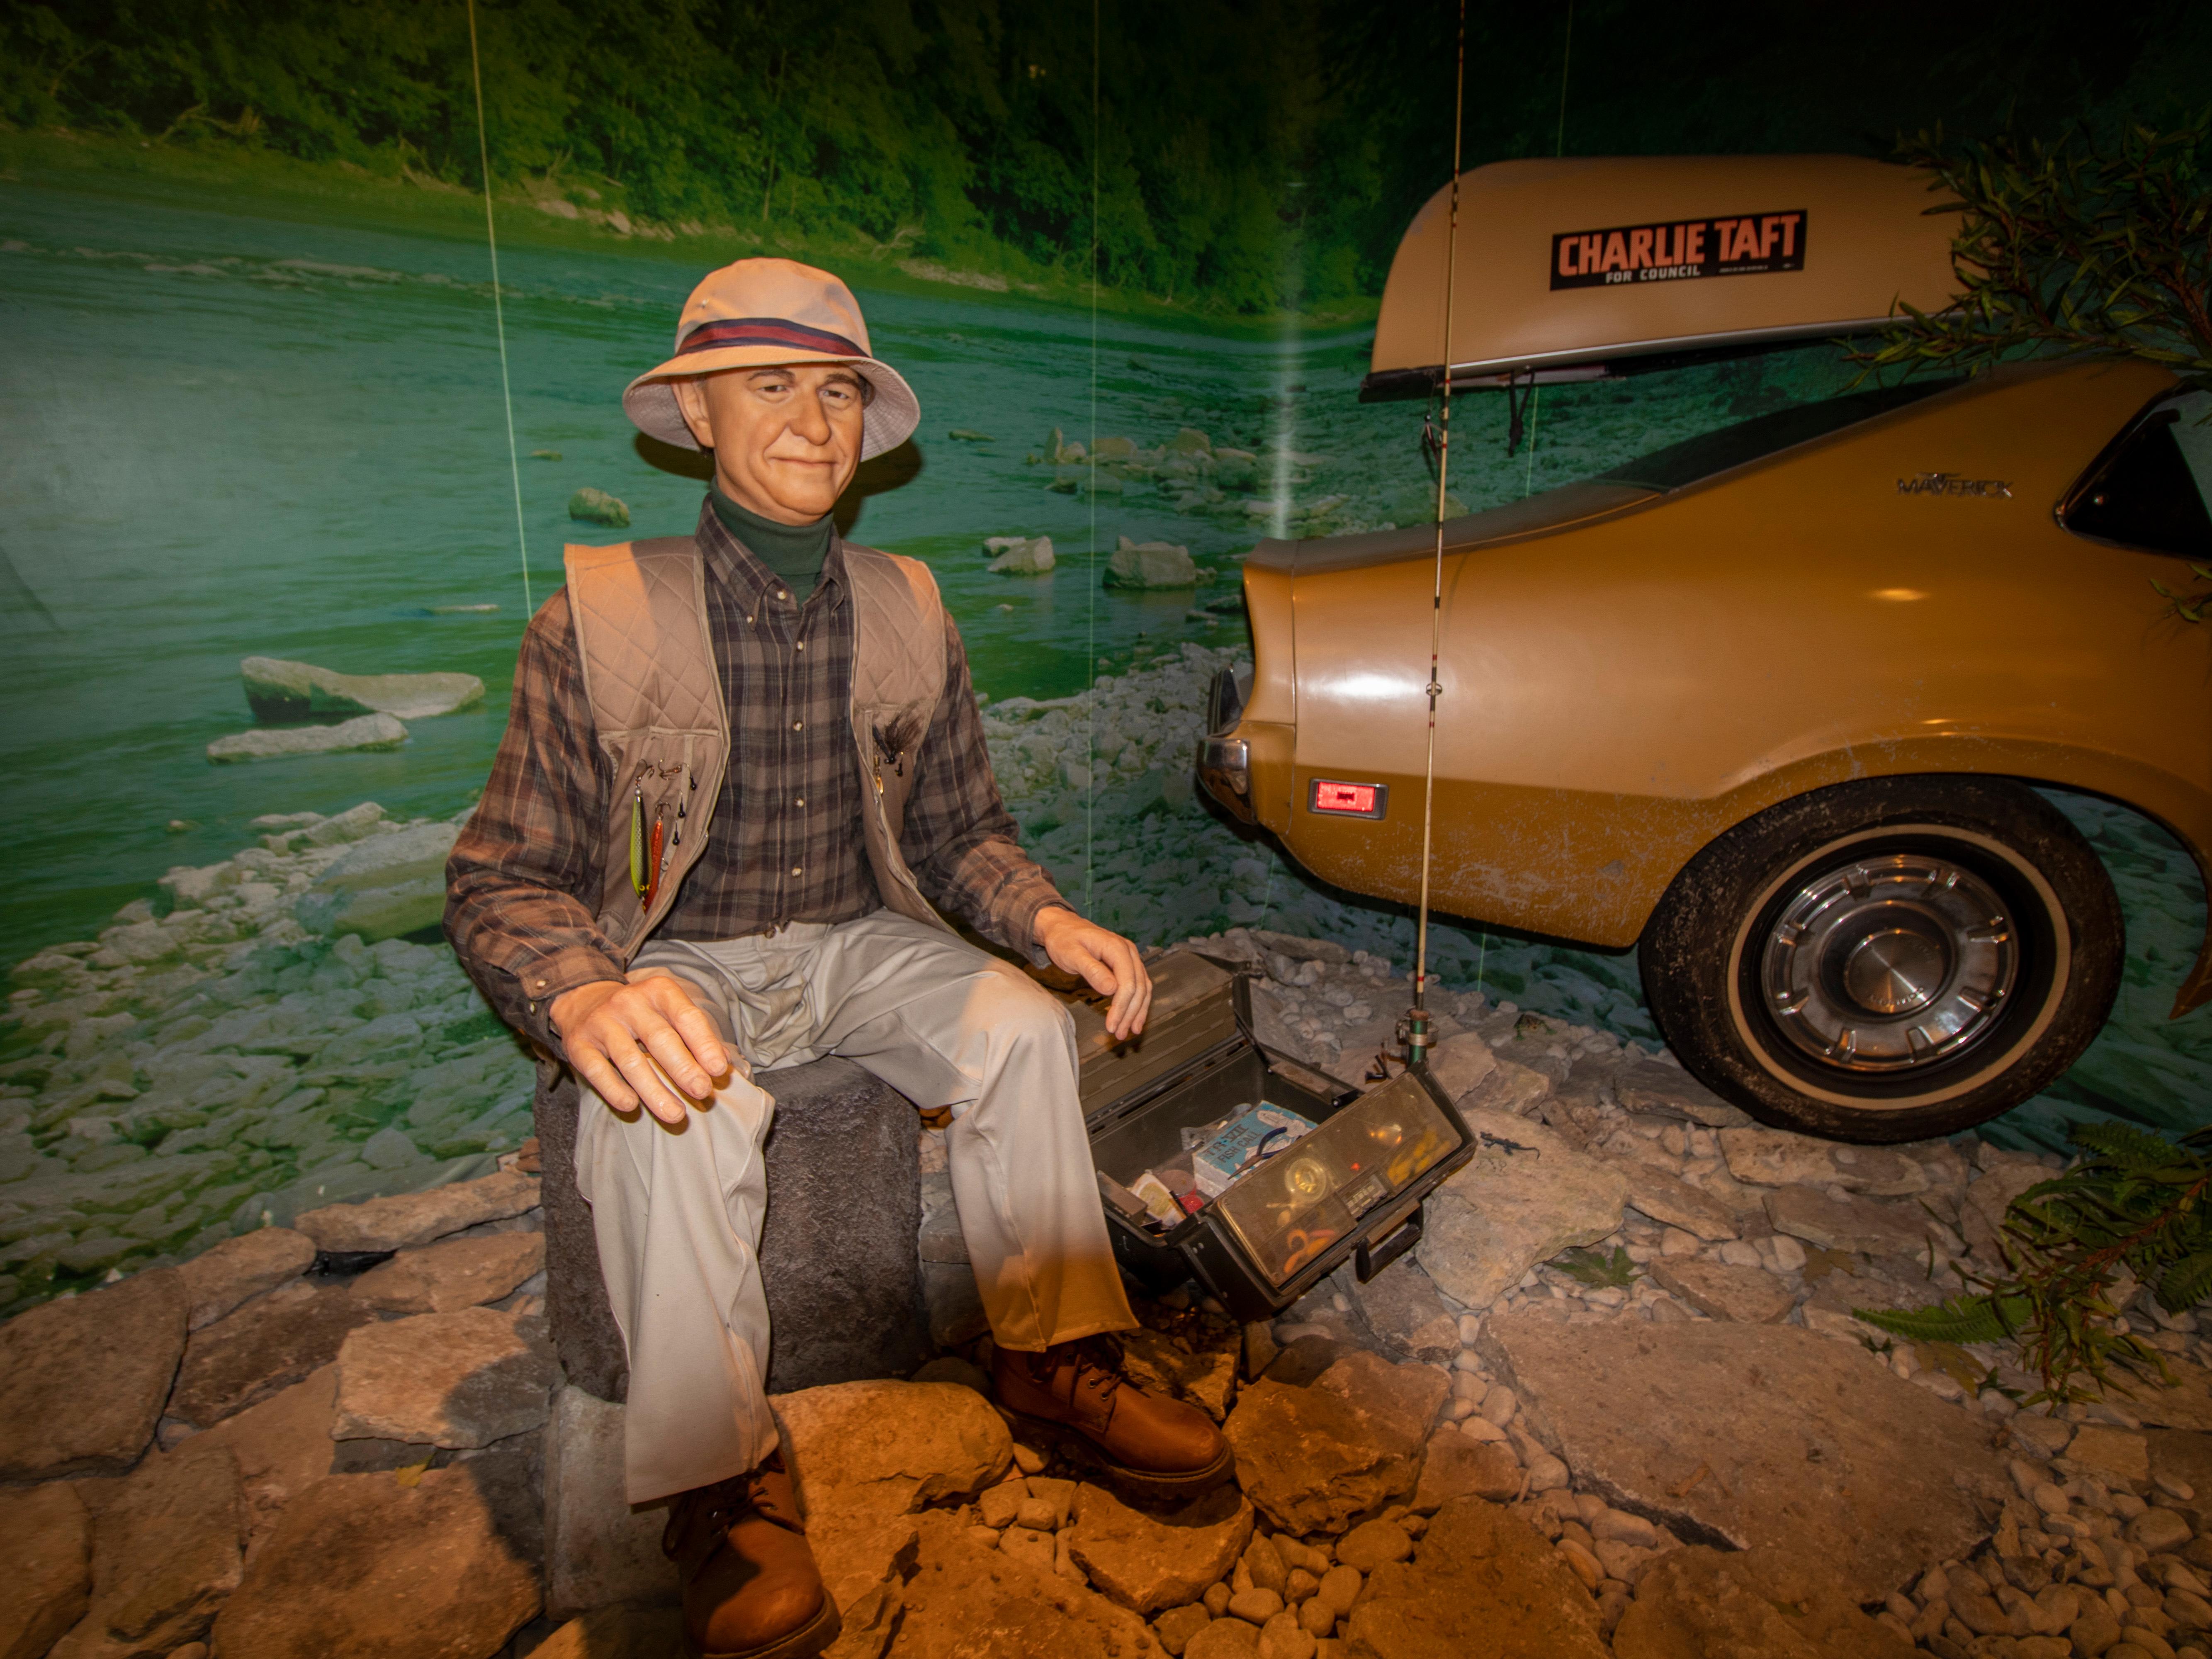 A sitting model of an older man in a vest, shirt and pants next to a replica of a car & canoe on top